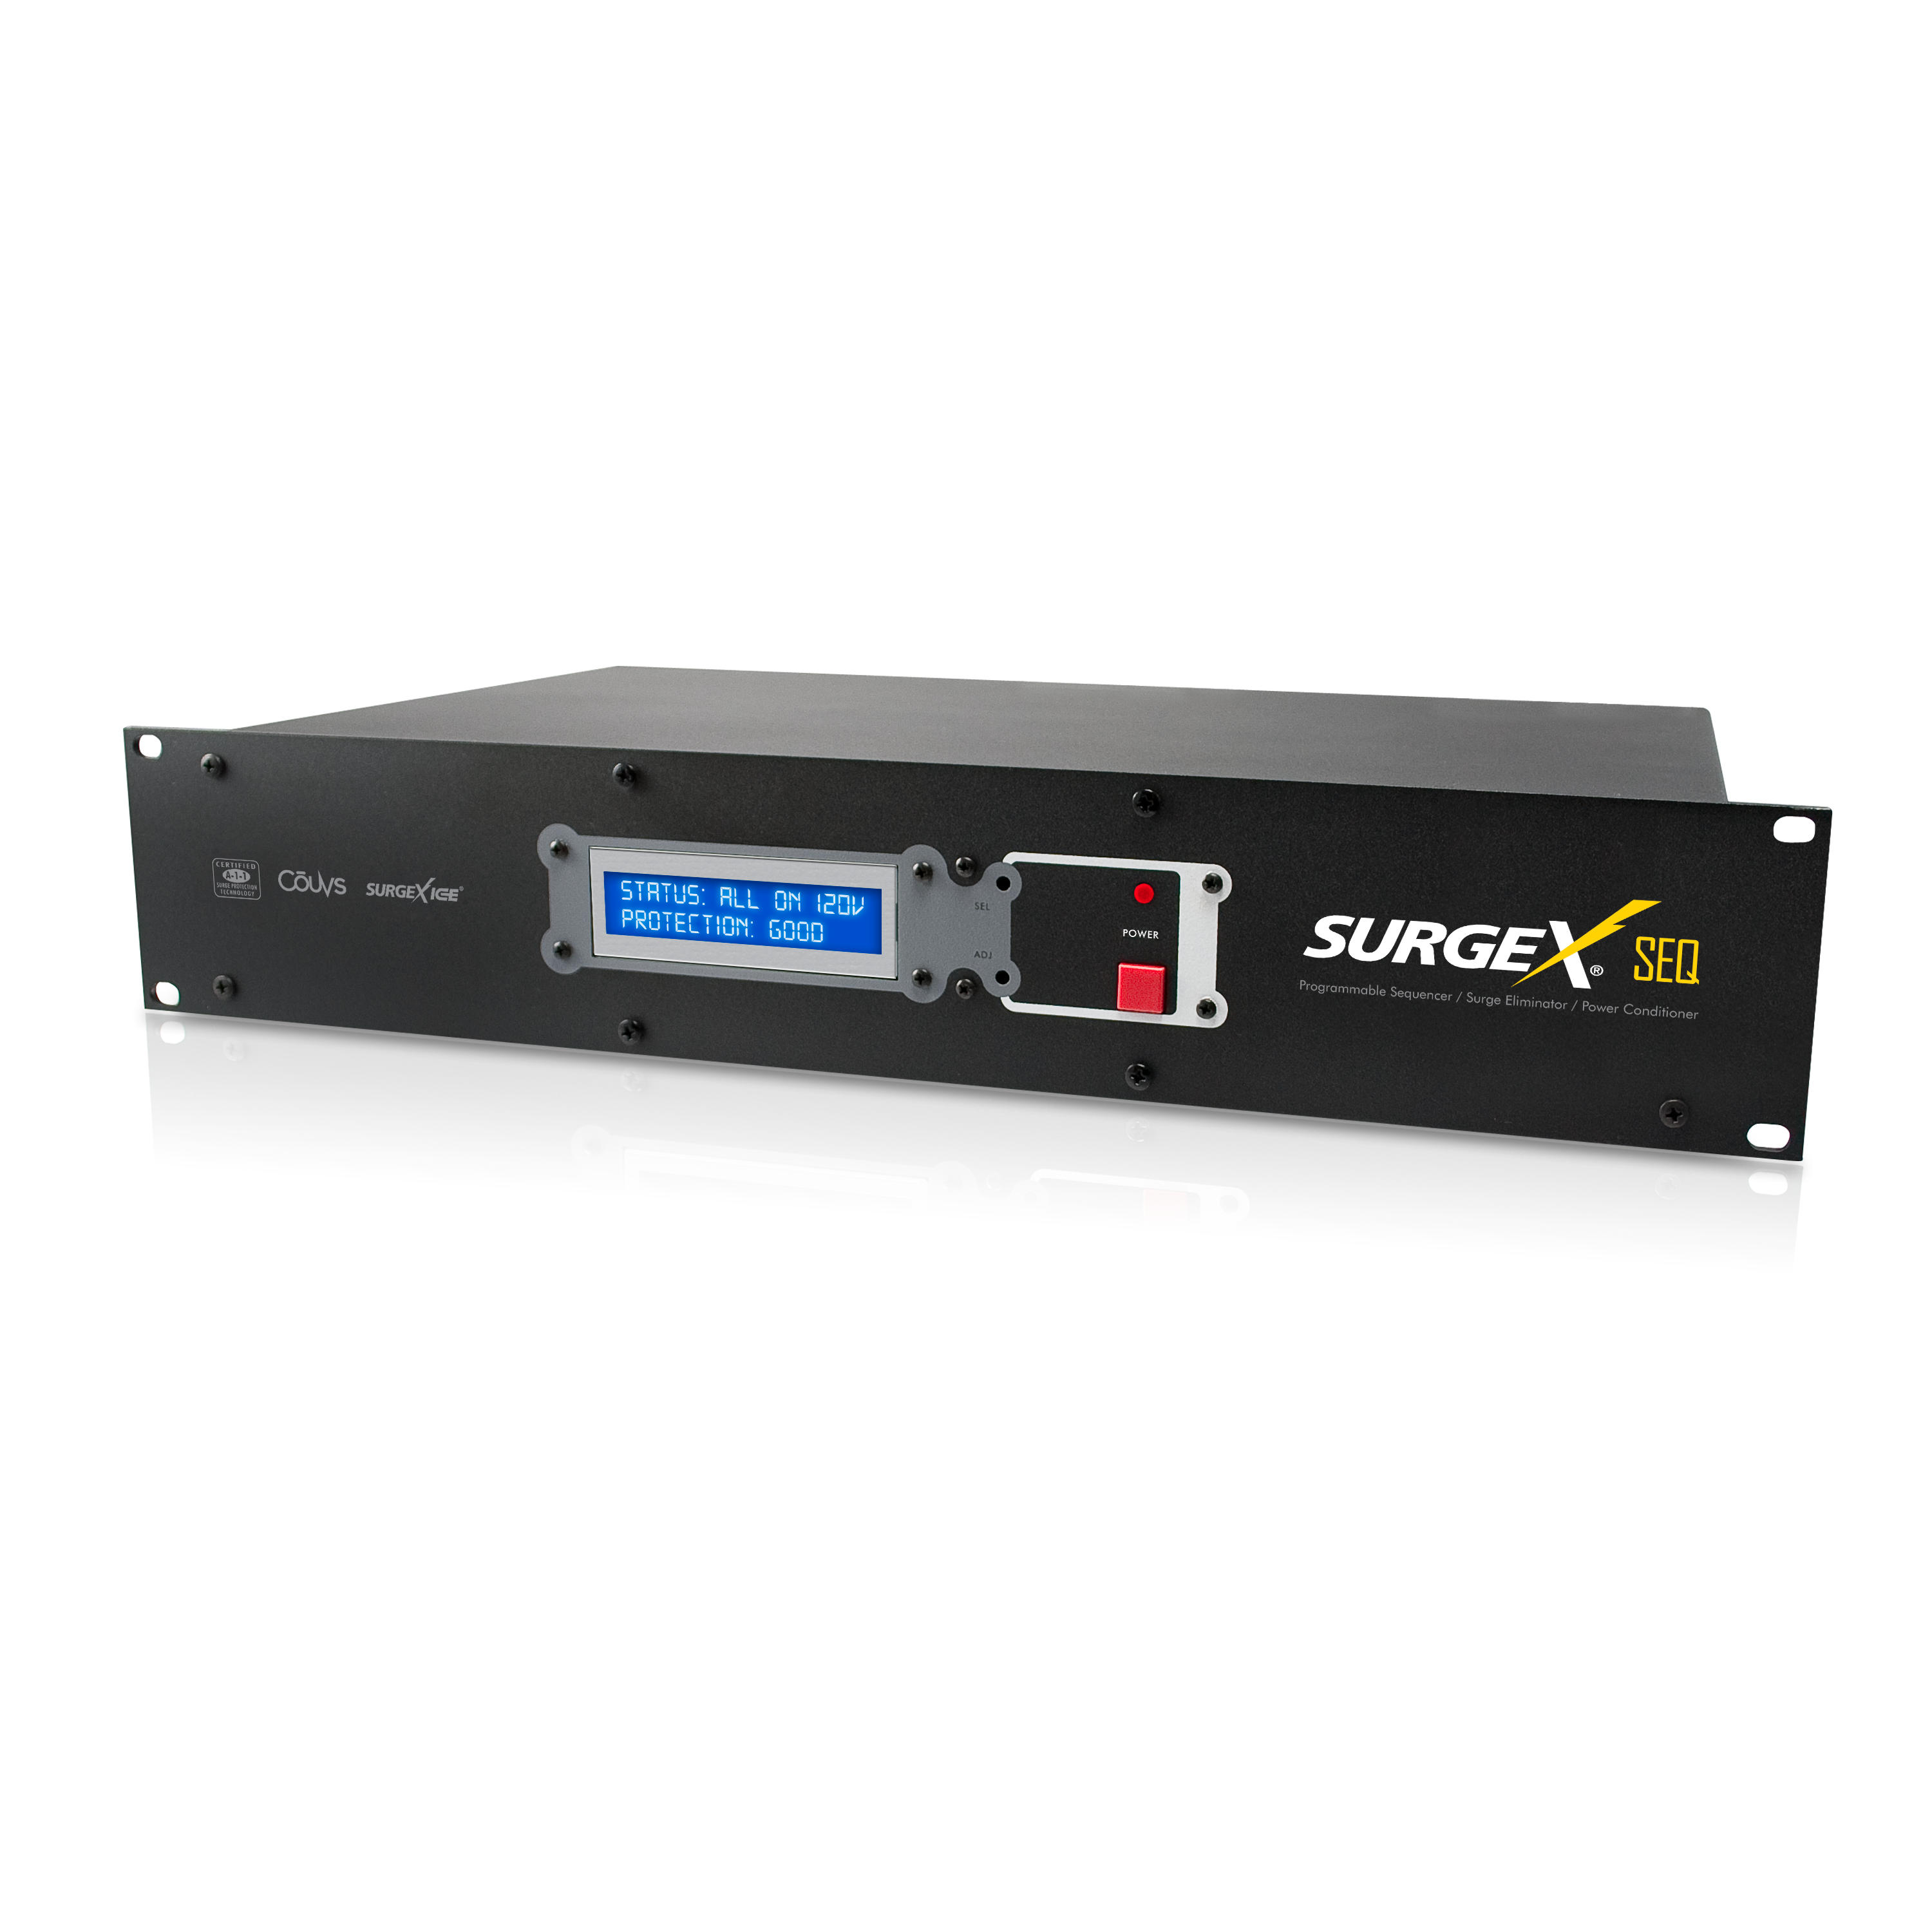 SEQ Sequencing Surge Eliminator and Power Conditioner